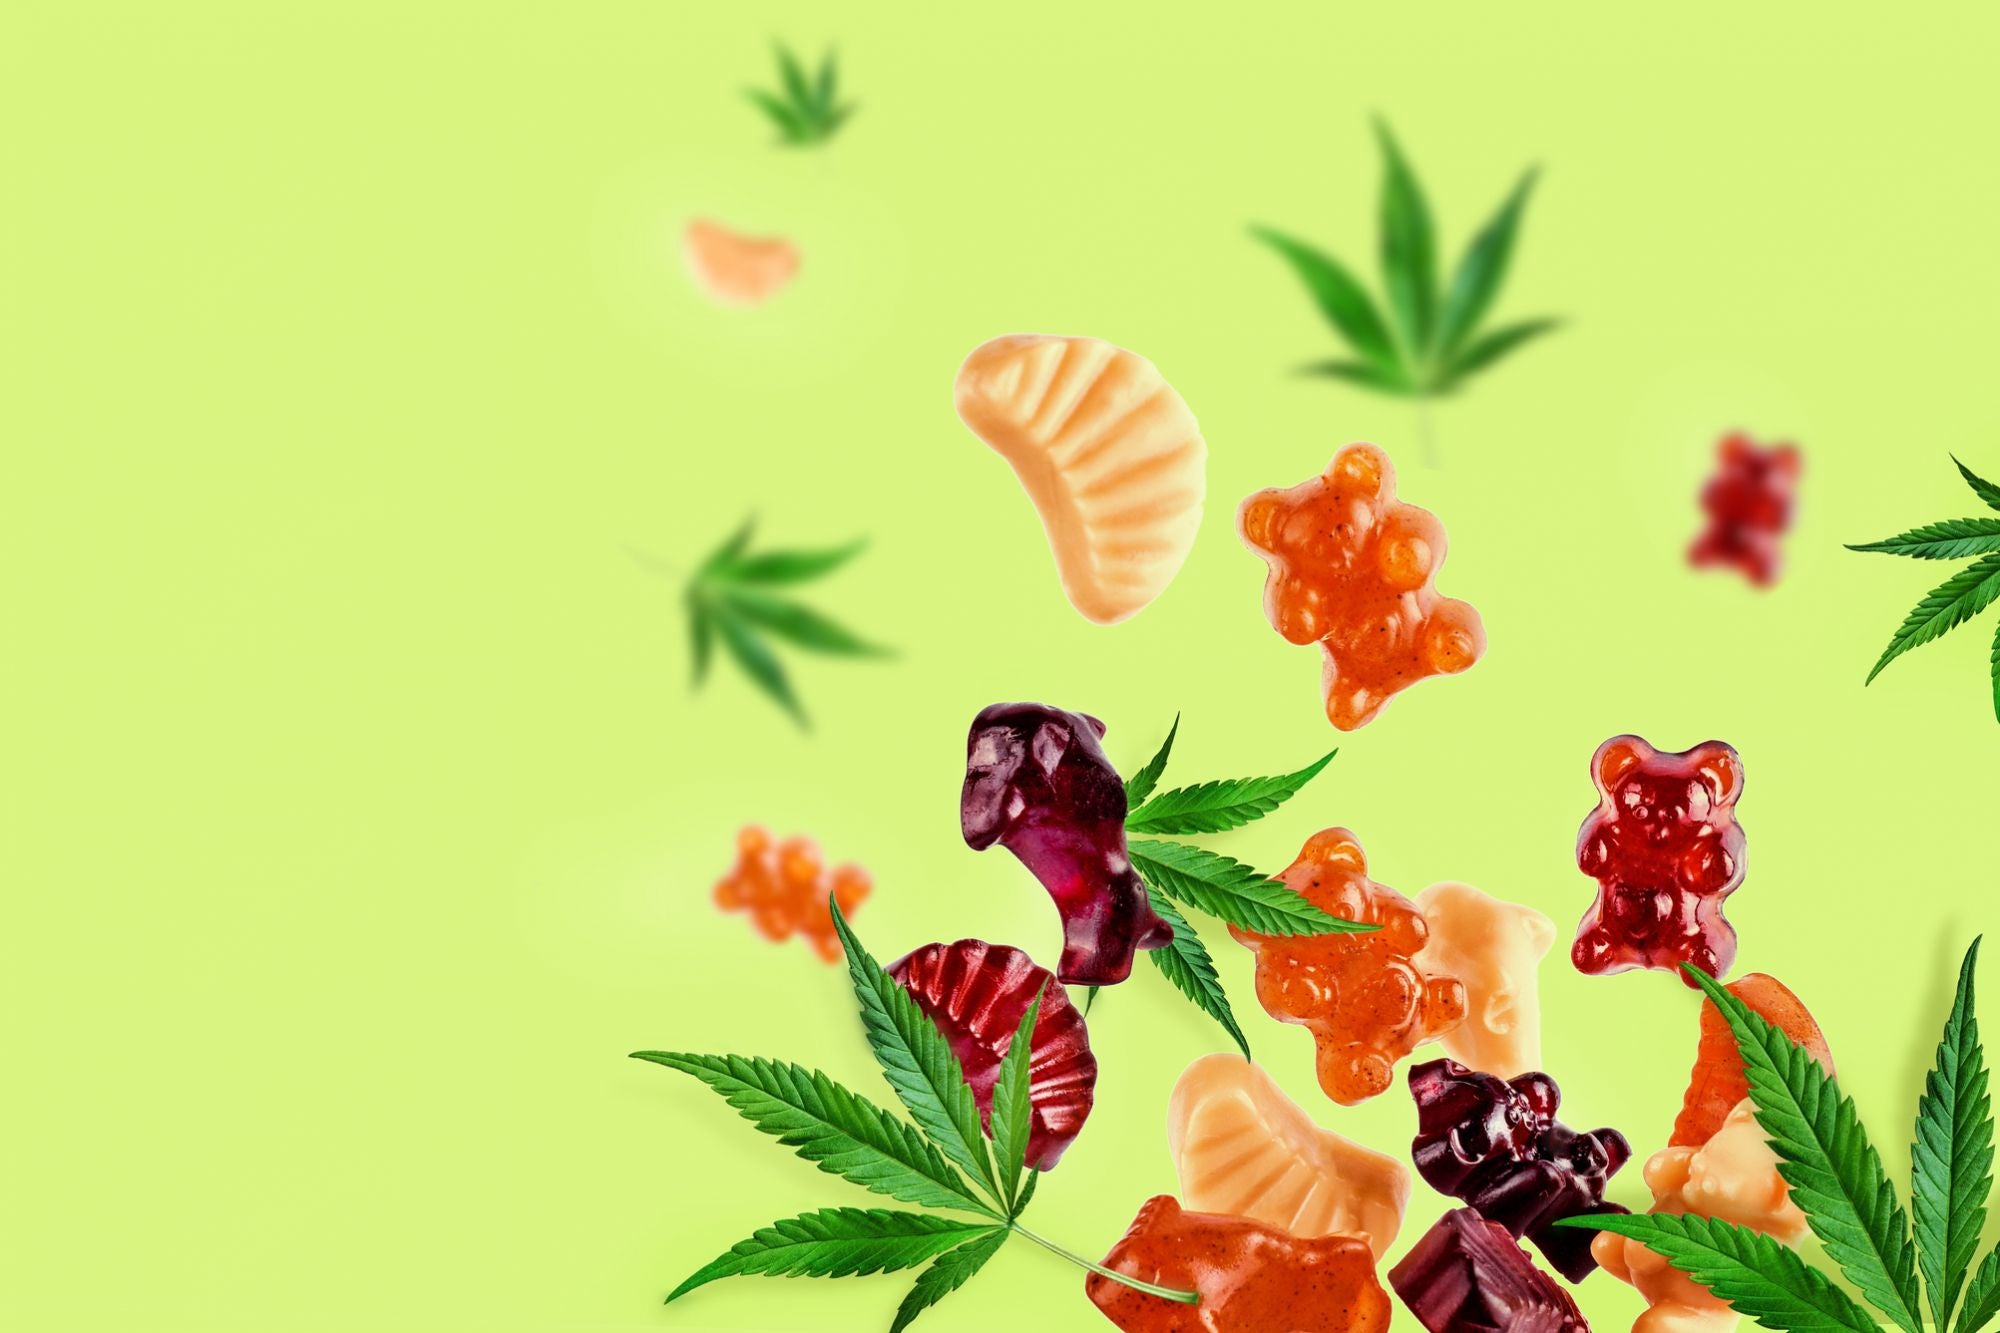 Get CBD Gummies for Anxiety, Sleep, and Pain Relief In 2022